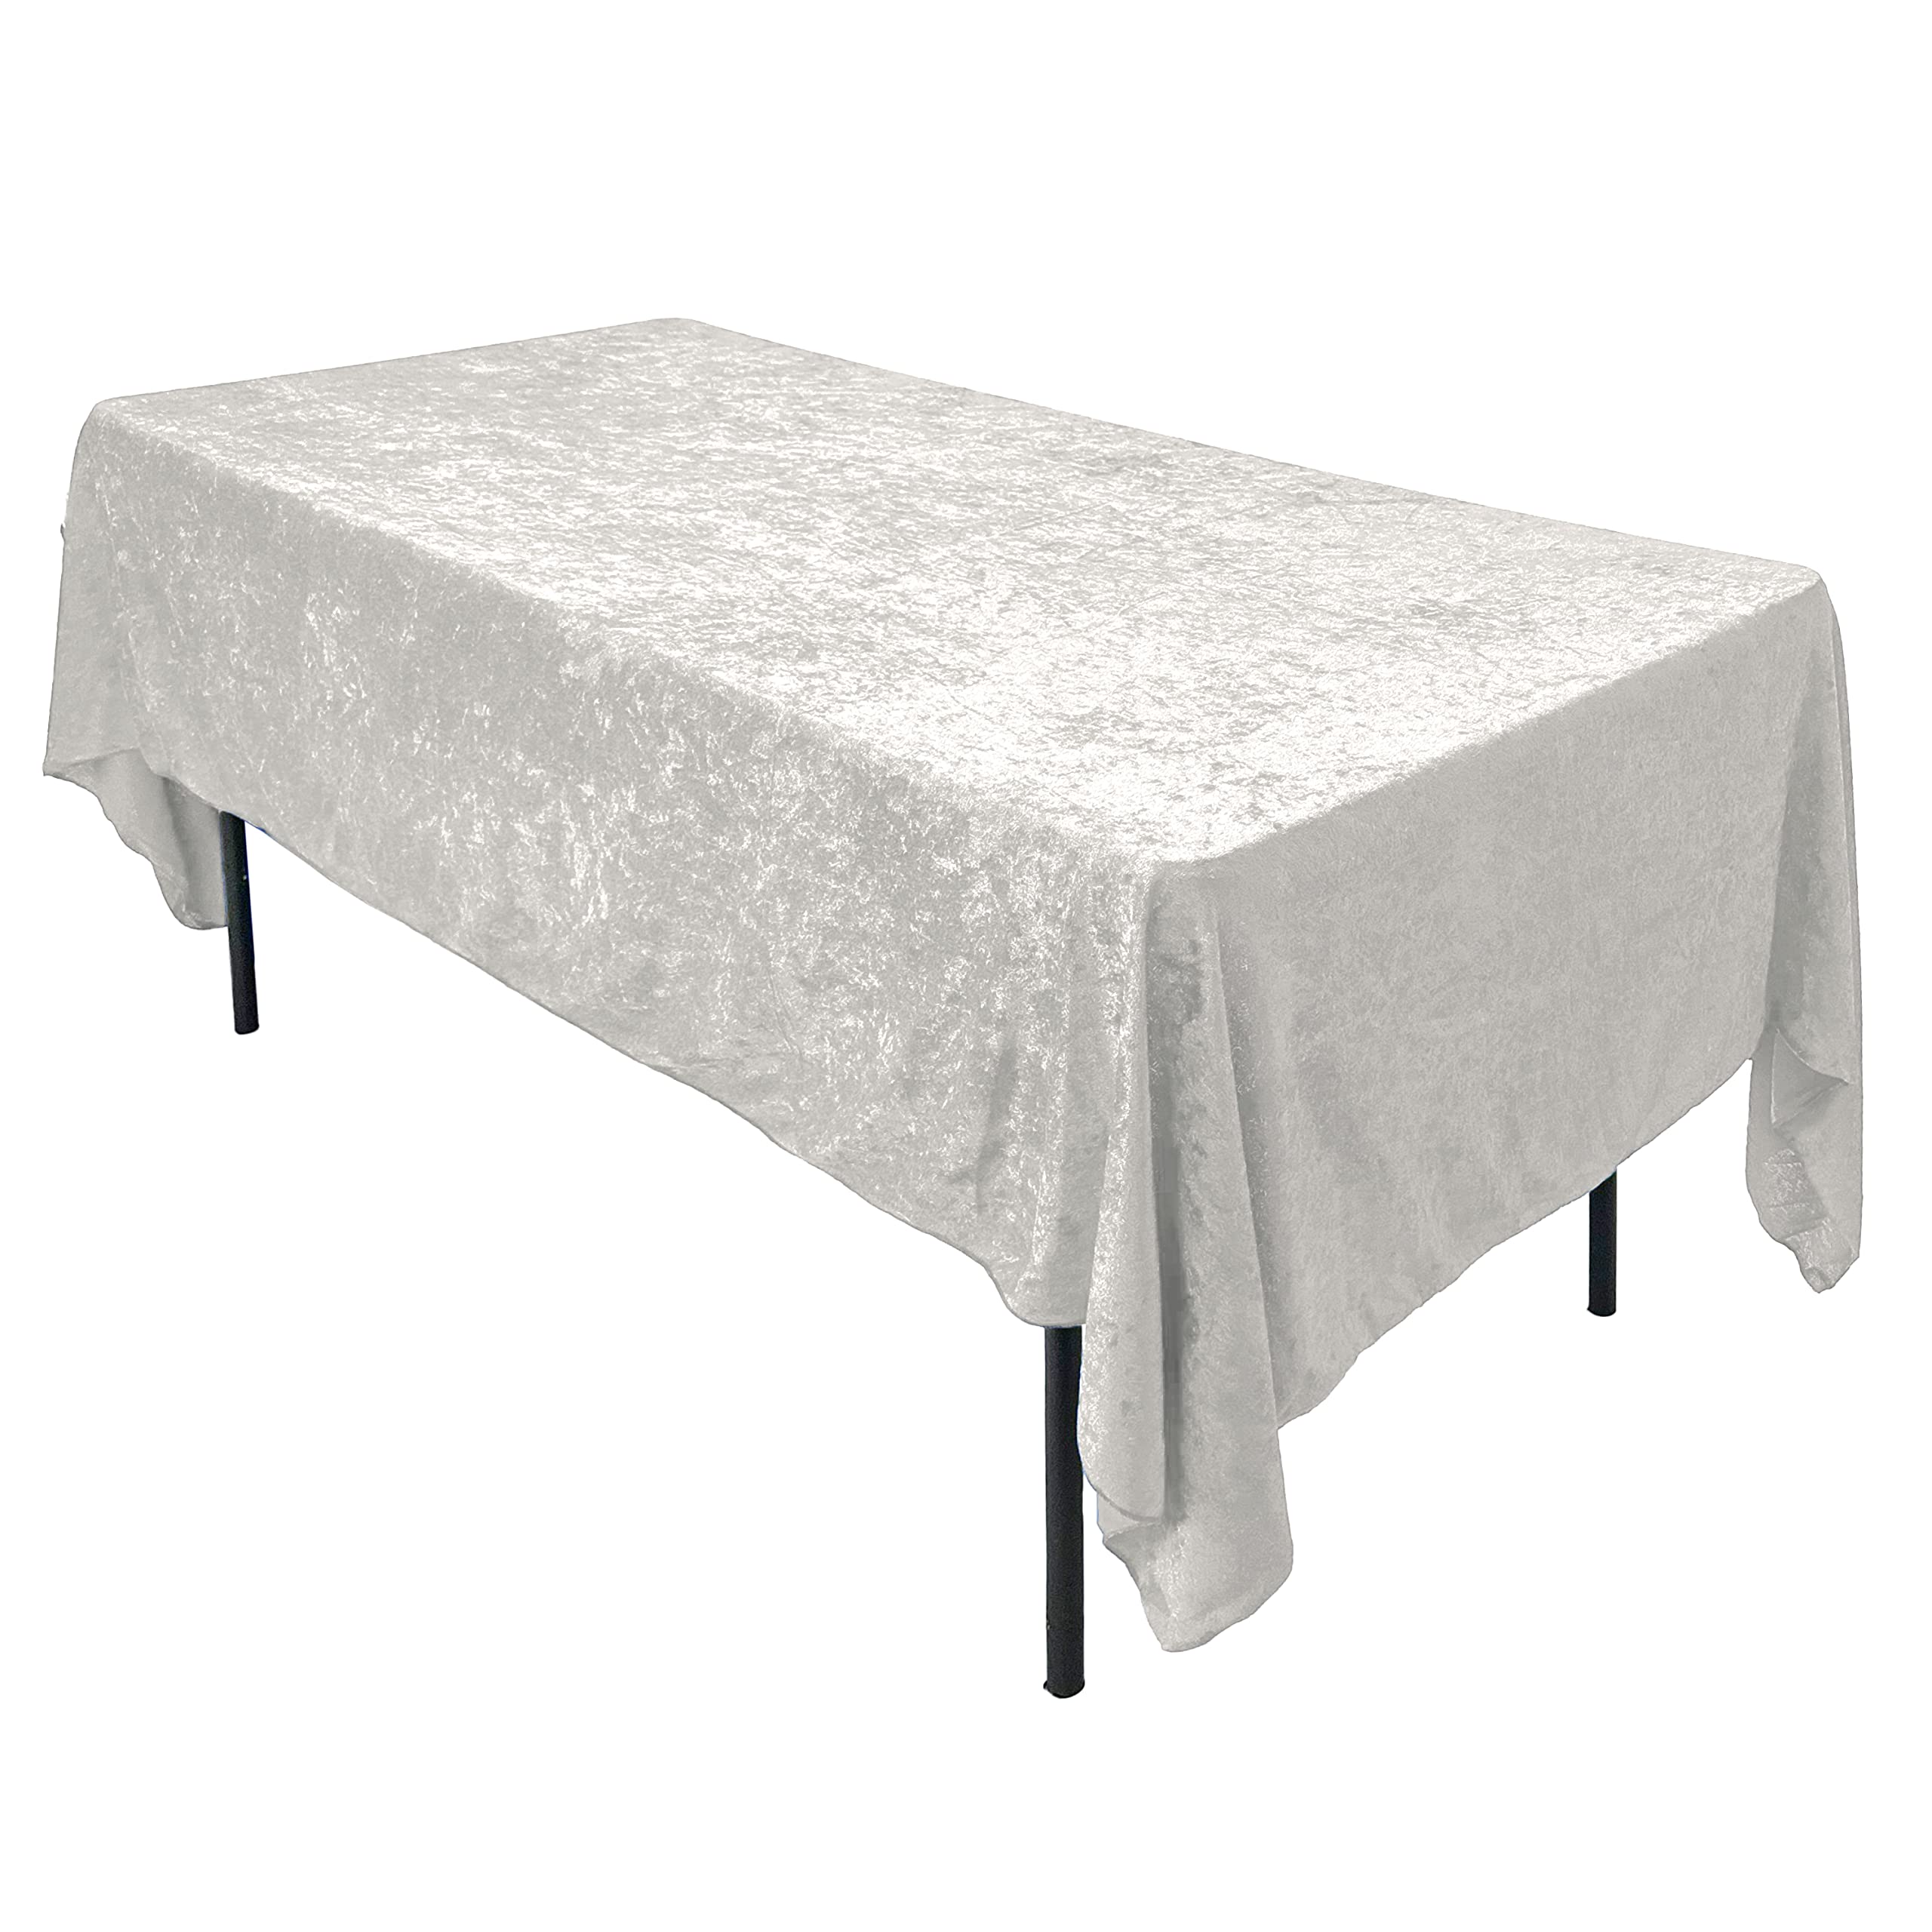 AK TRADING CO. Lush Panne Velvet Tablecloth - 60 x 102 Inch Rectangular Table Cover | Great for Buffet Table, Parties, Holiday Dinner, Wedding & Baby Shower (White, 60 x 102 Inch)